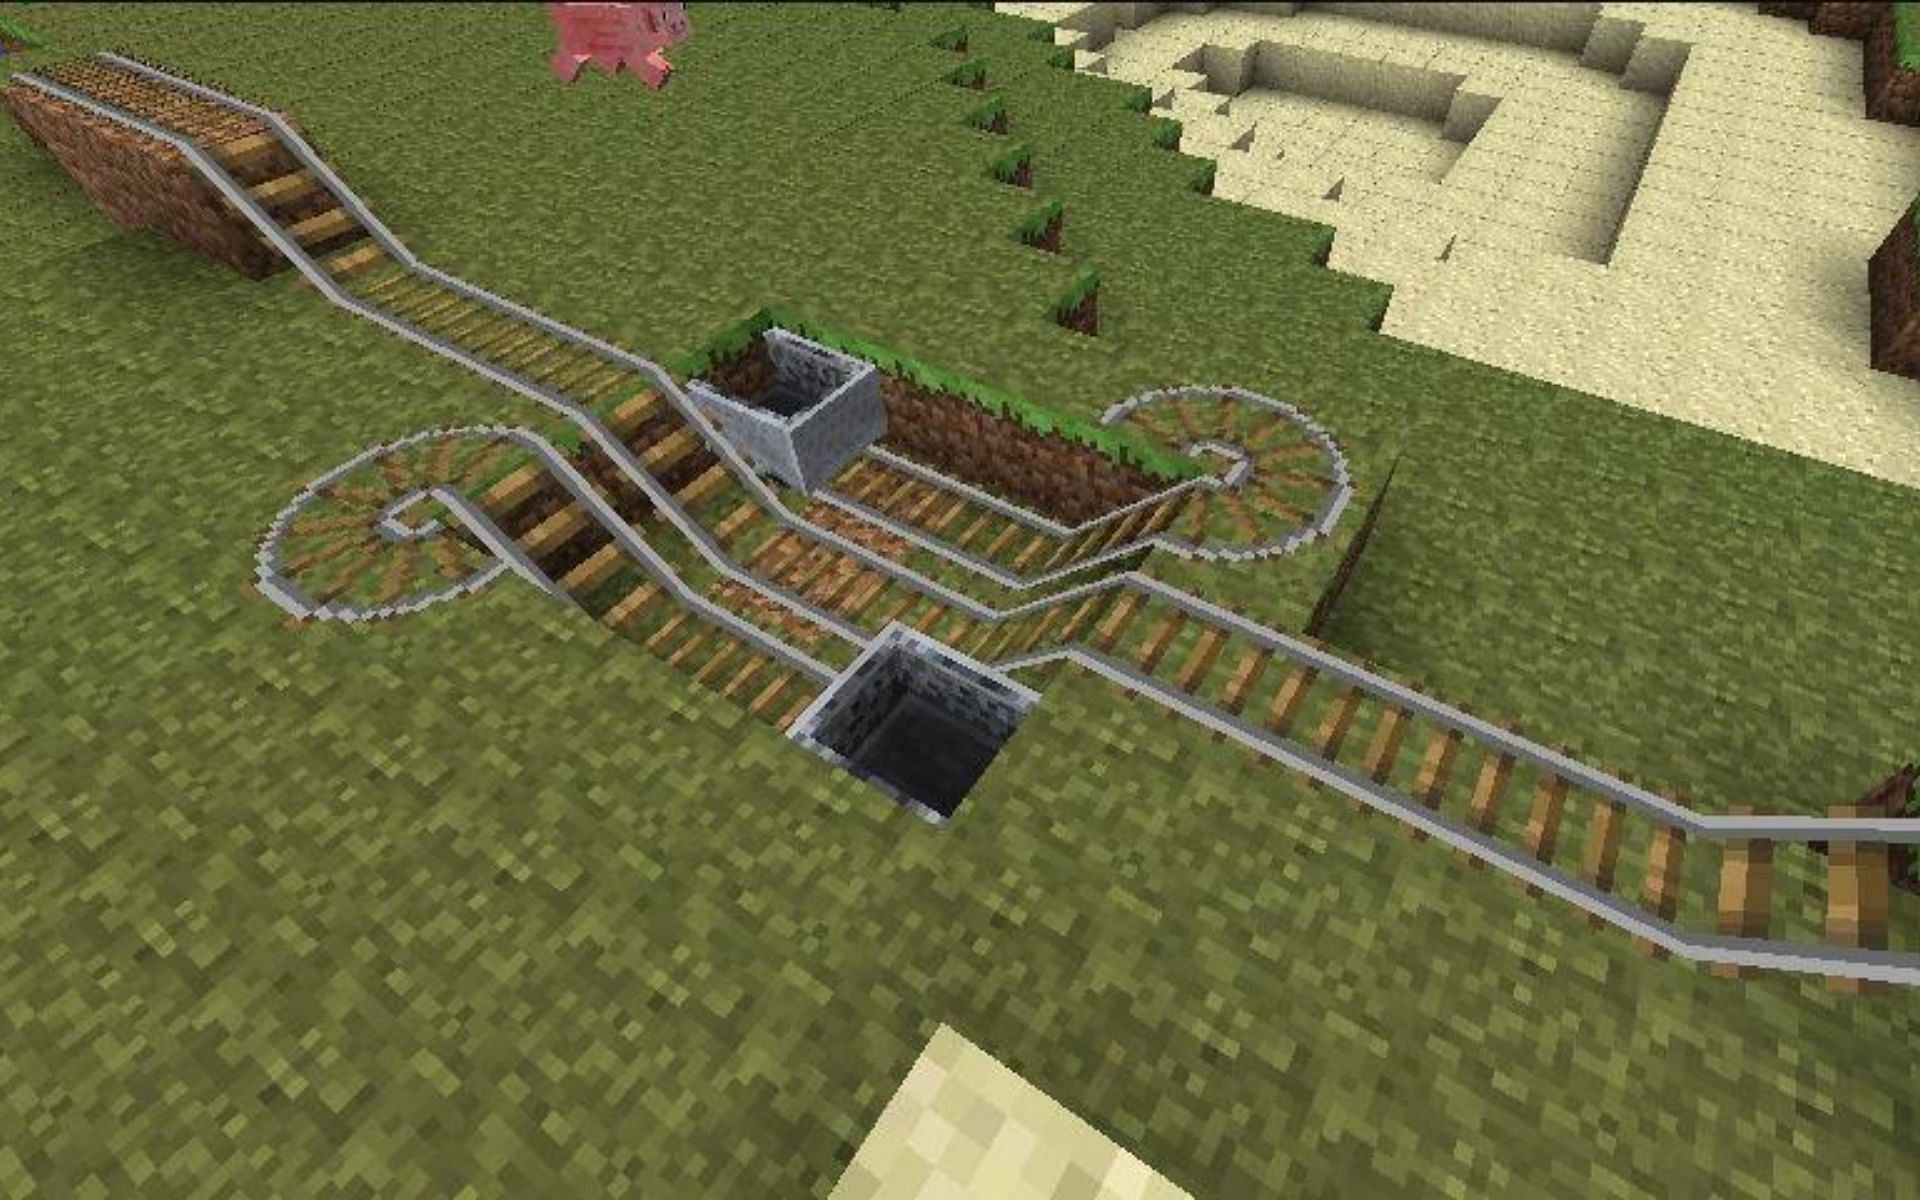 How players used to thrust minecarts in Minecraft before powered rails (Image via u/KrazyMack Reddit)